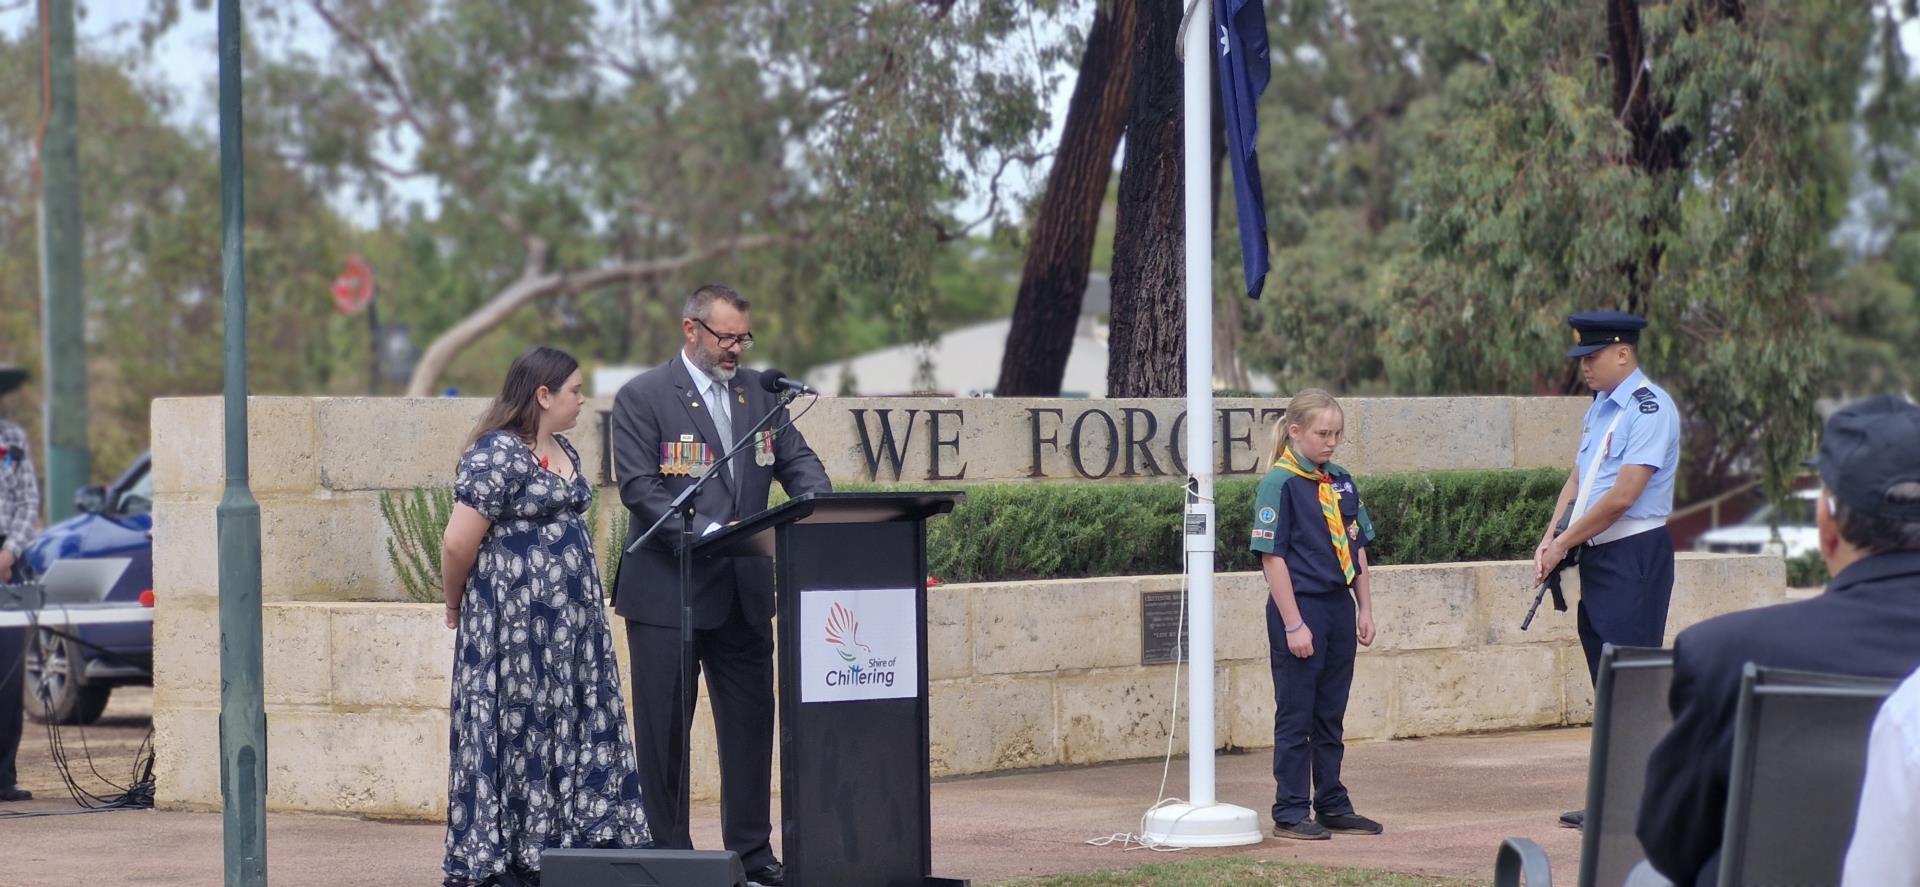 CHITTERING ANZAC Day - Recognition and Rememberance